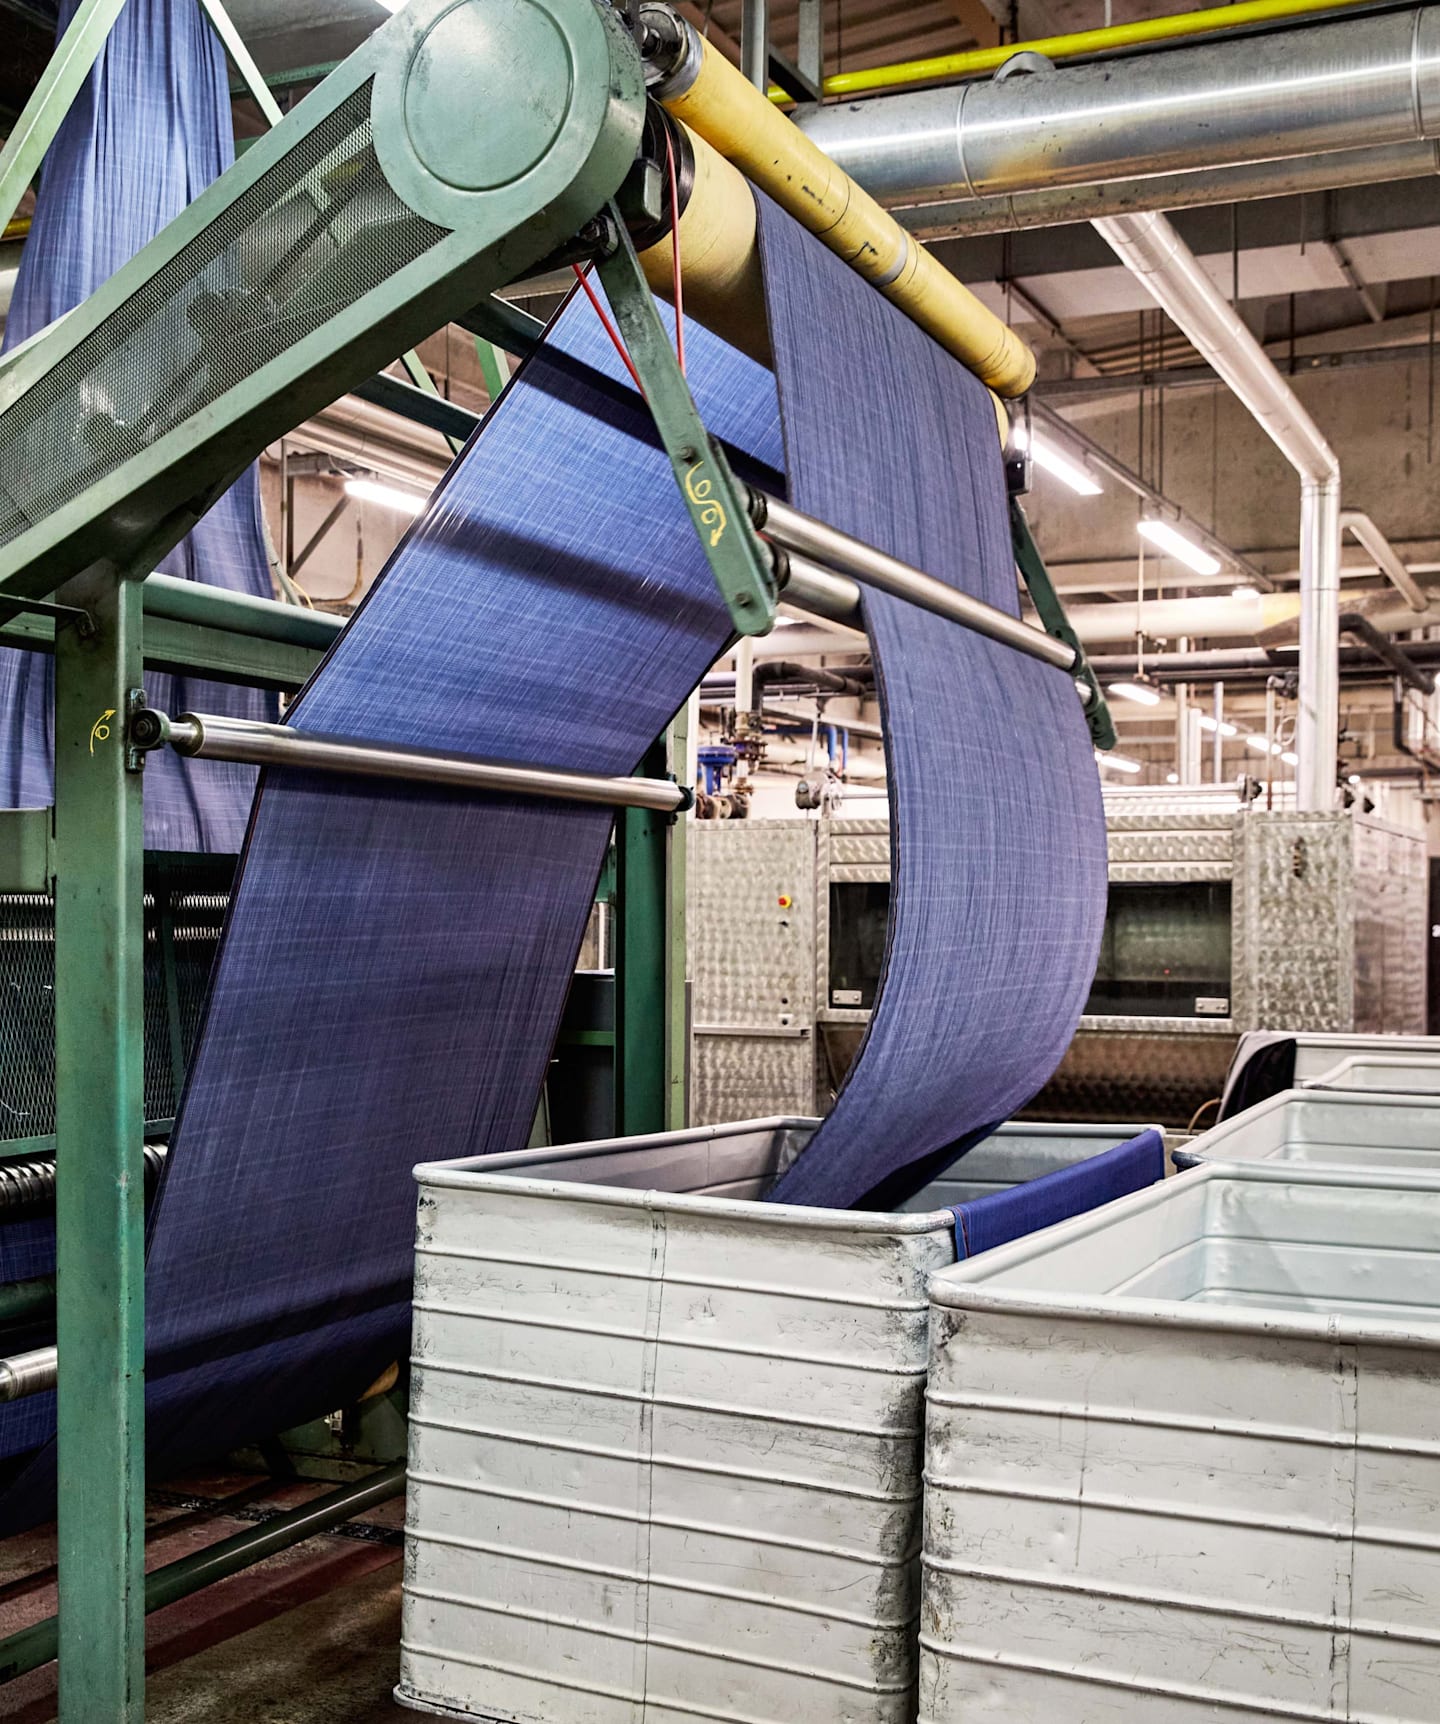  Fabric being washed after its woven to ensure softness.